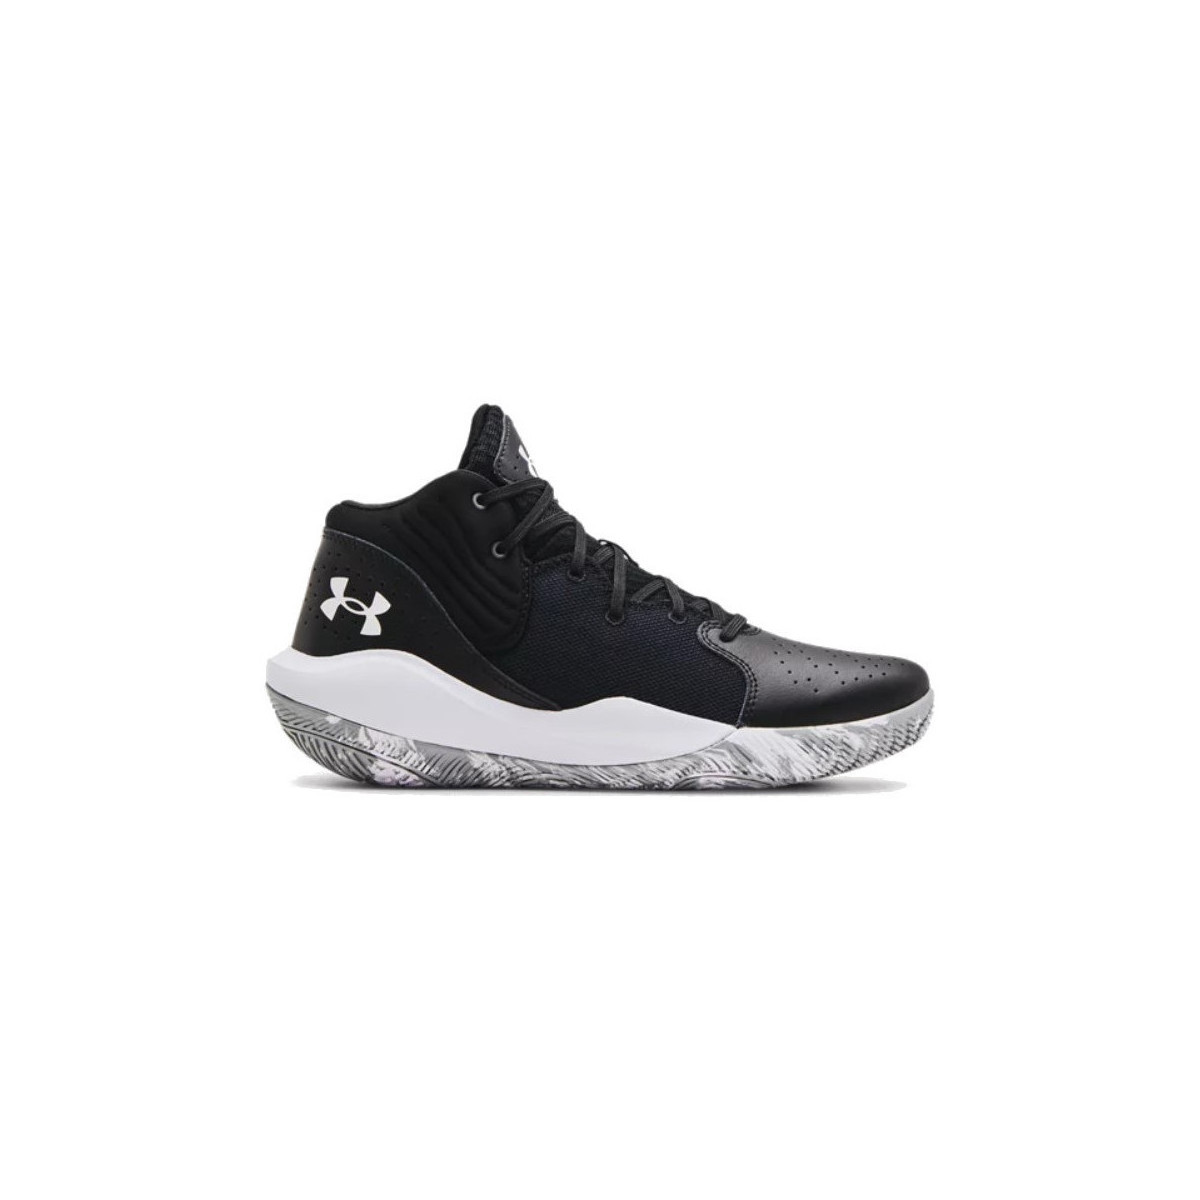 Chaussures Basketball Under Armour Chaussure de Basket Under Armo Multicolore